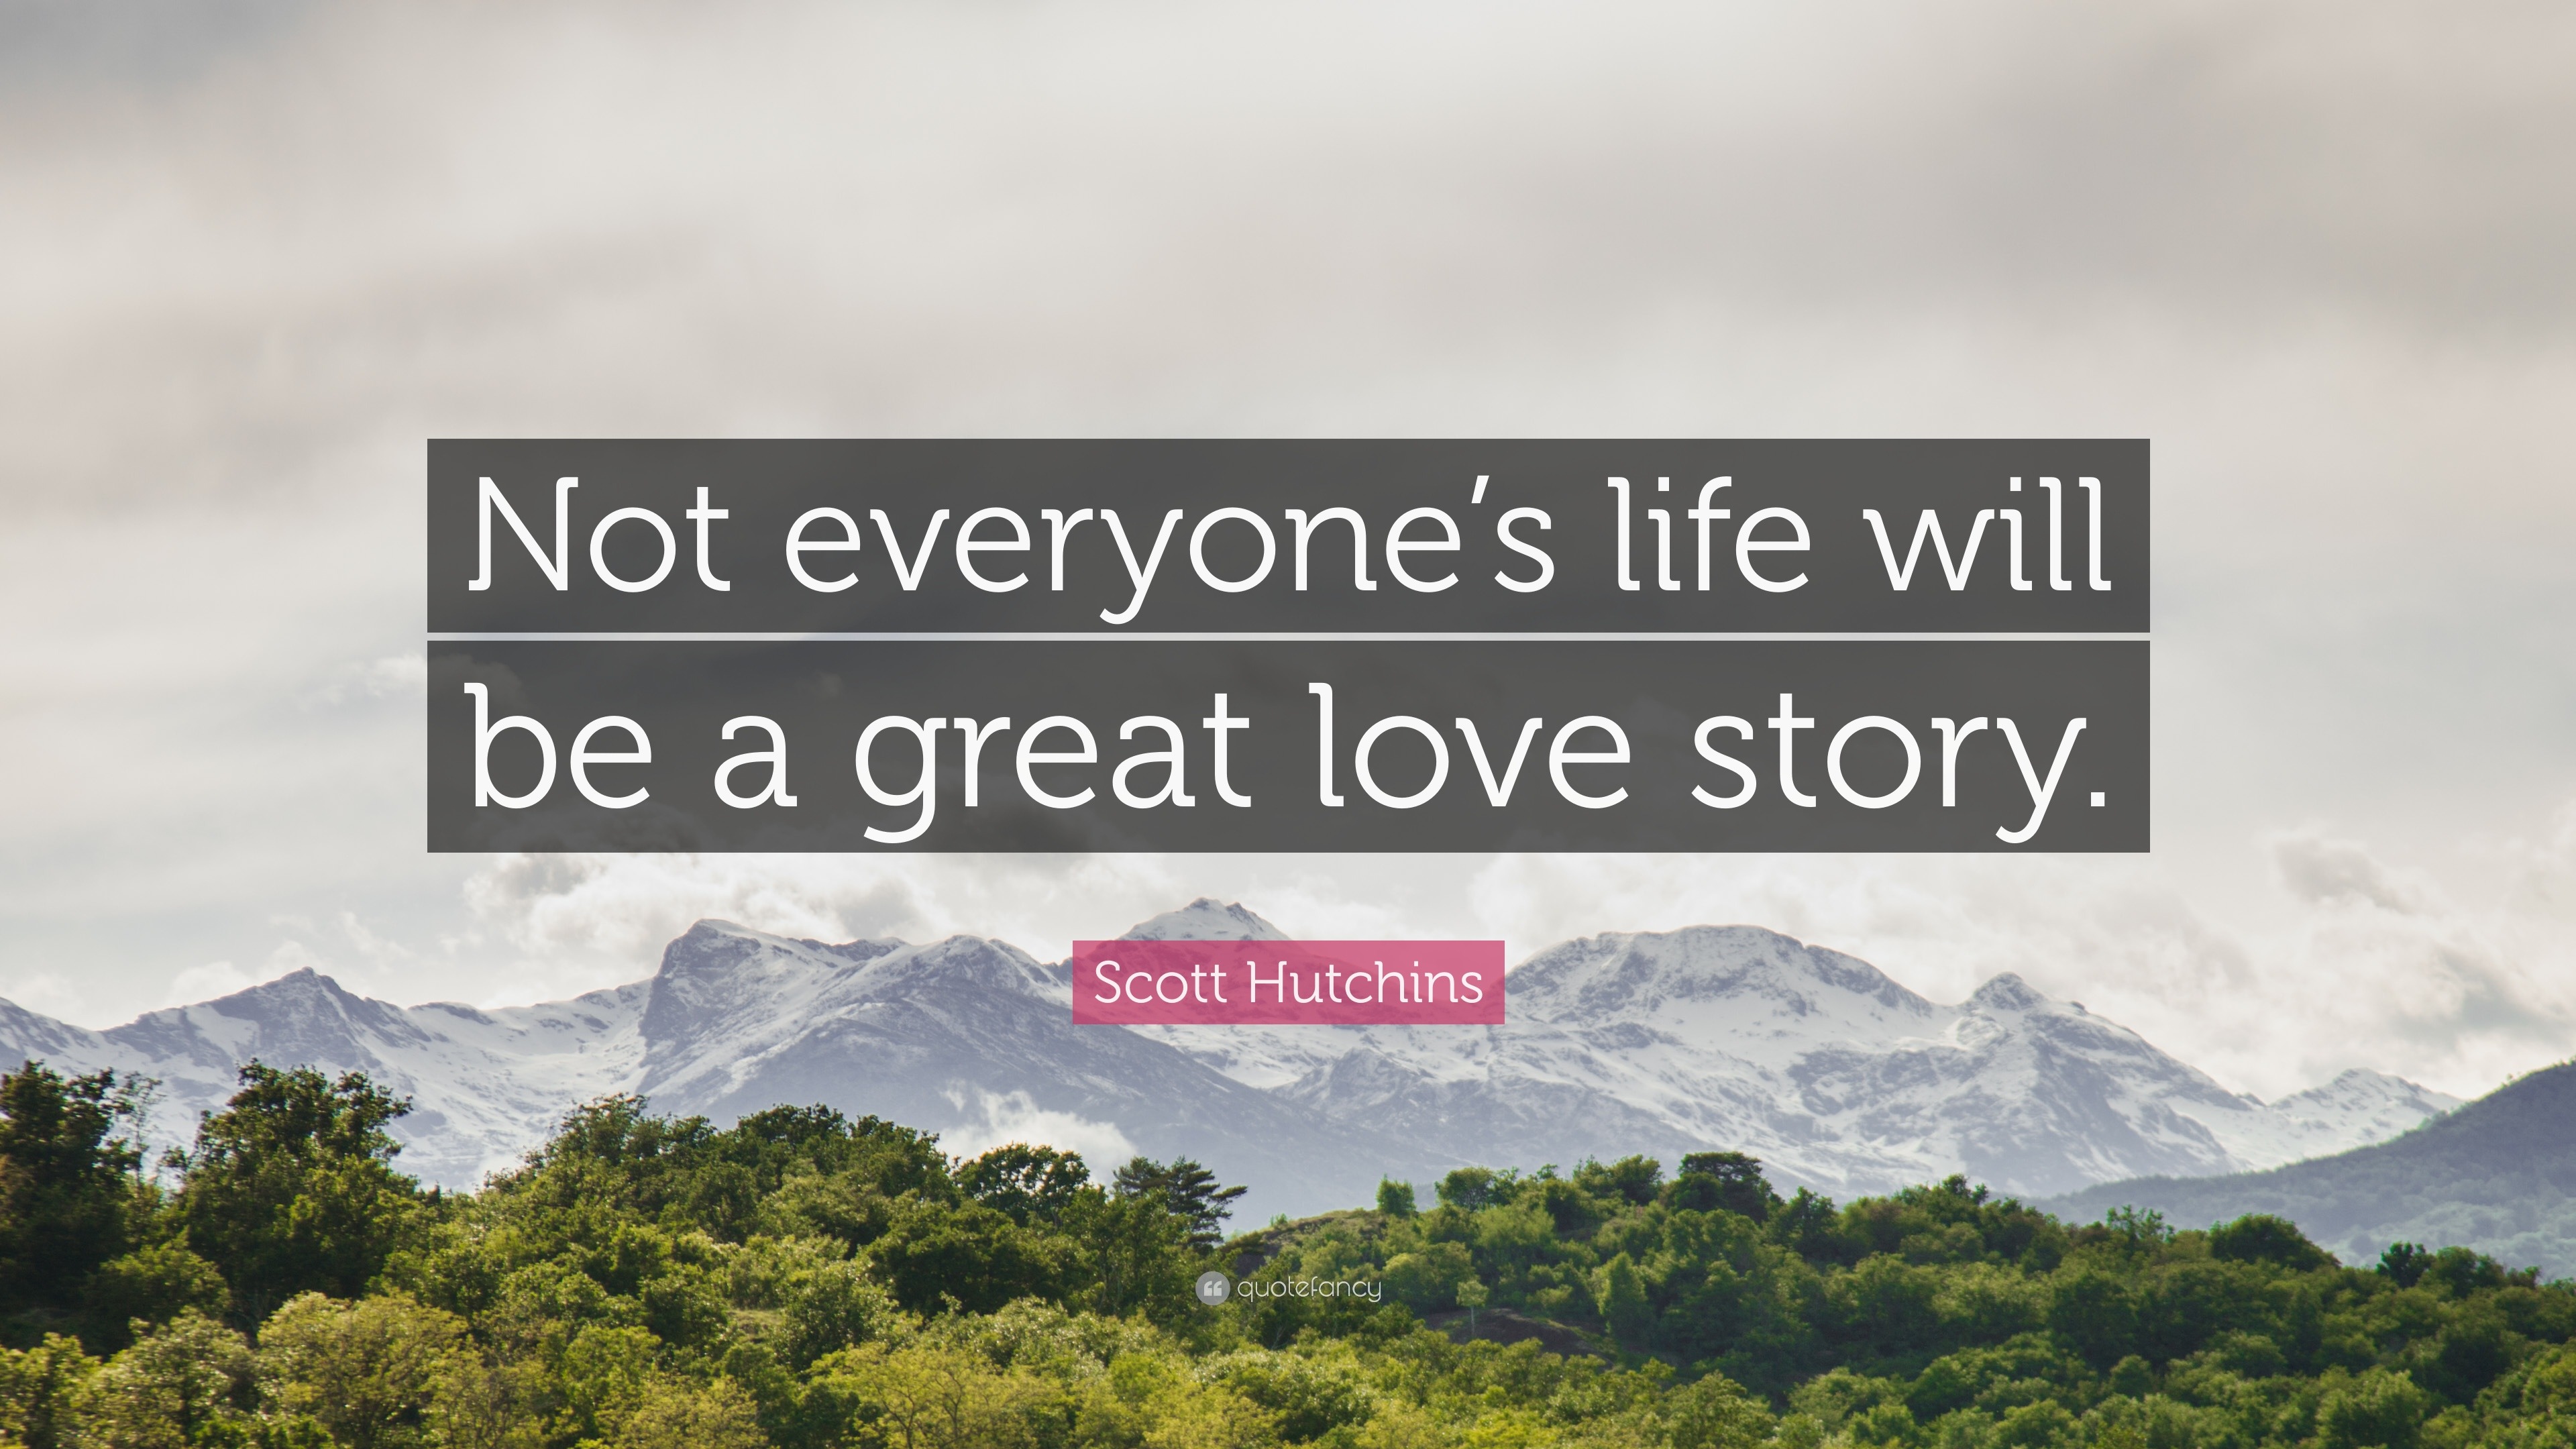 Scott Hutchins Quote “Not everyone s life will be a great love story ”